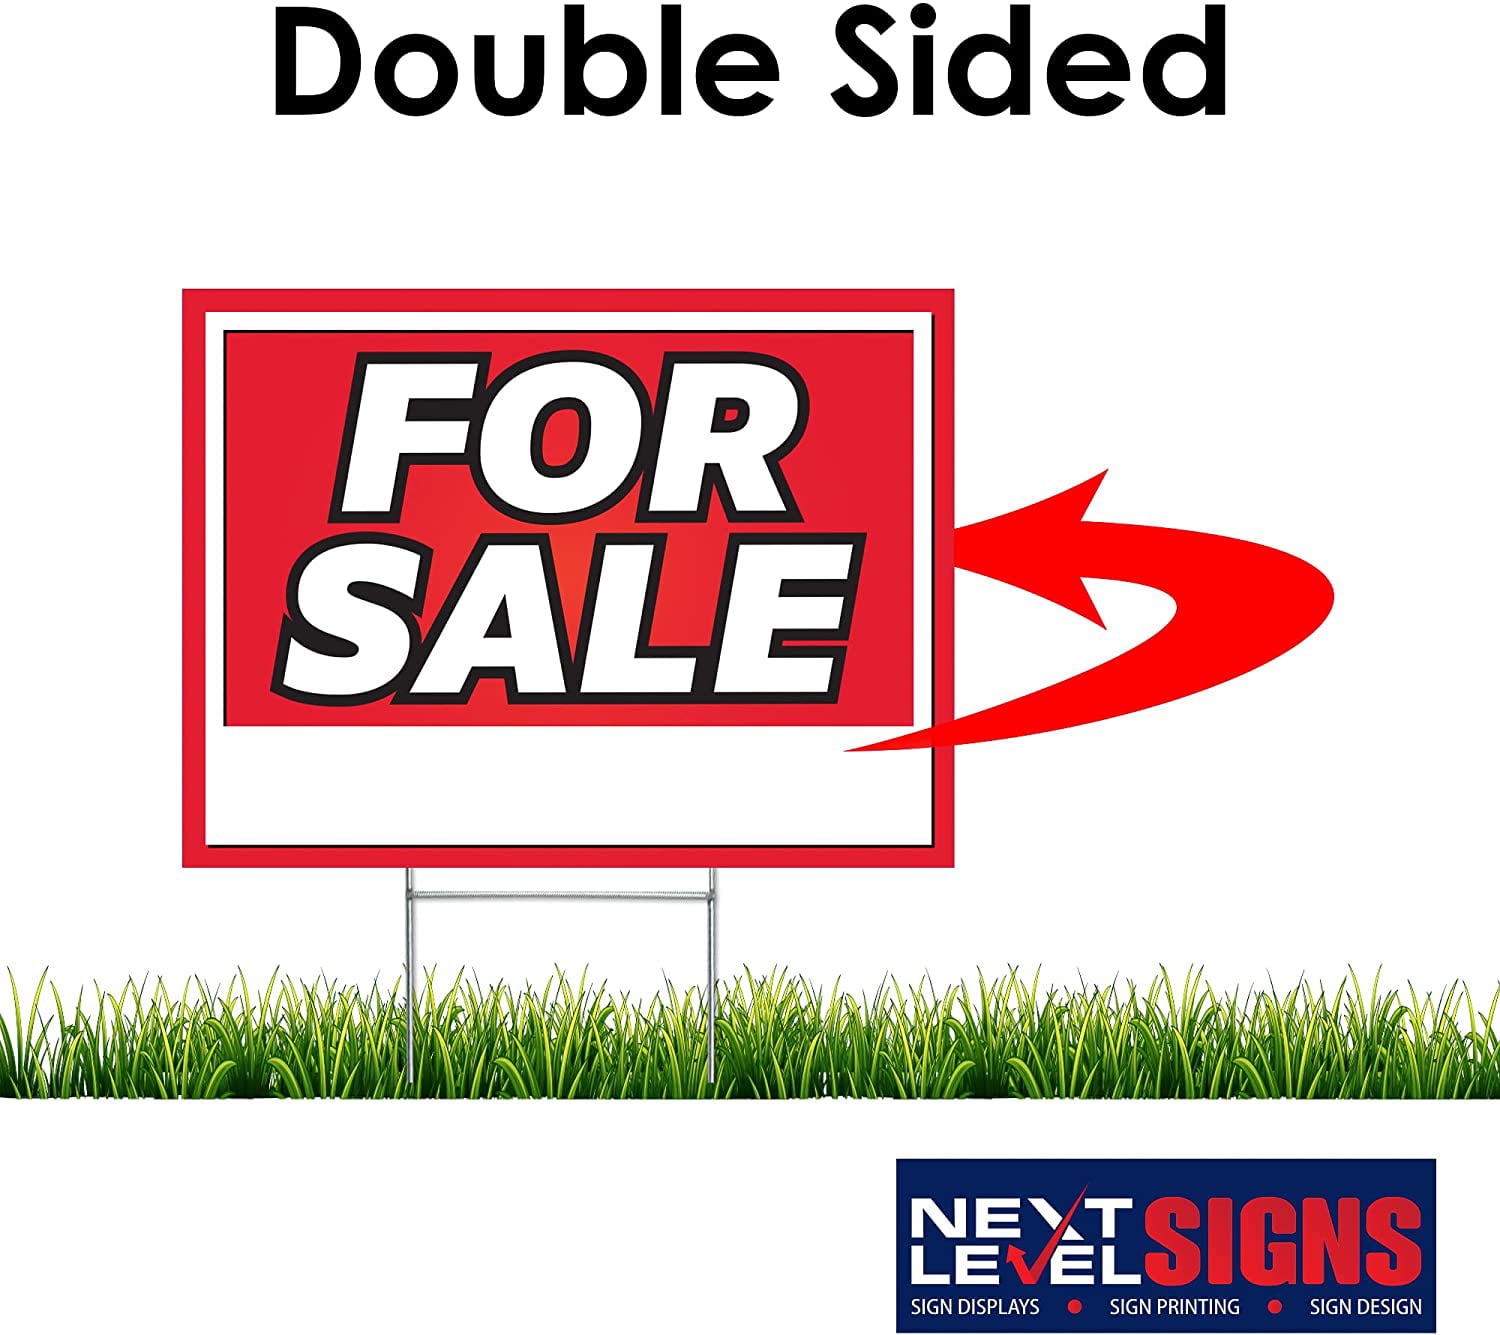 NEXT LEVEL SIGNS For Sale Yard Signs 24 W x 18 H Inches 24